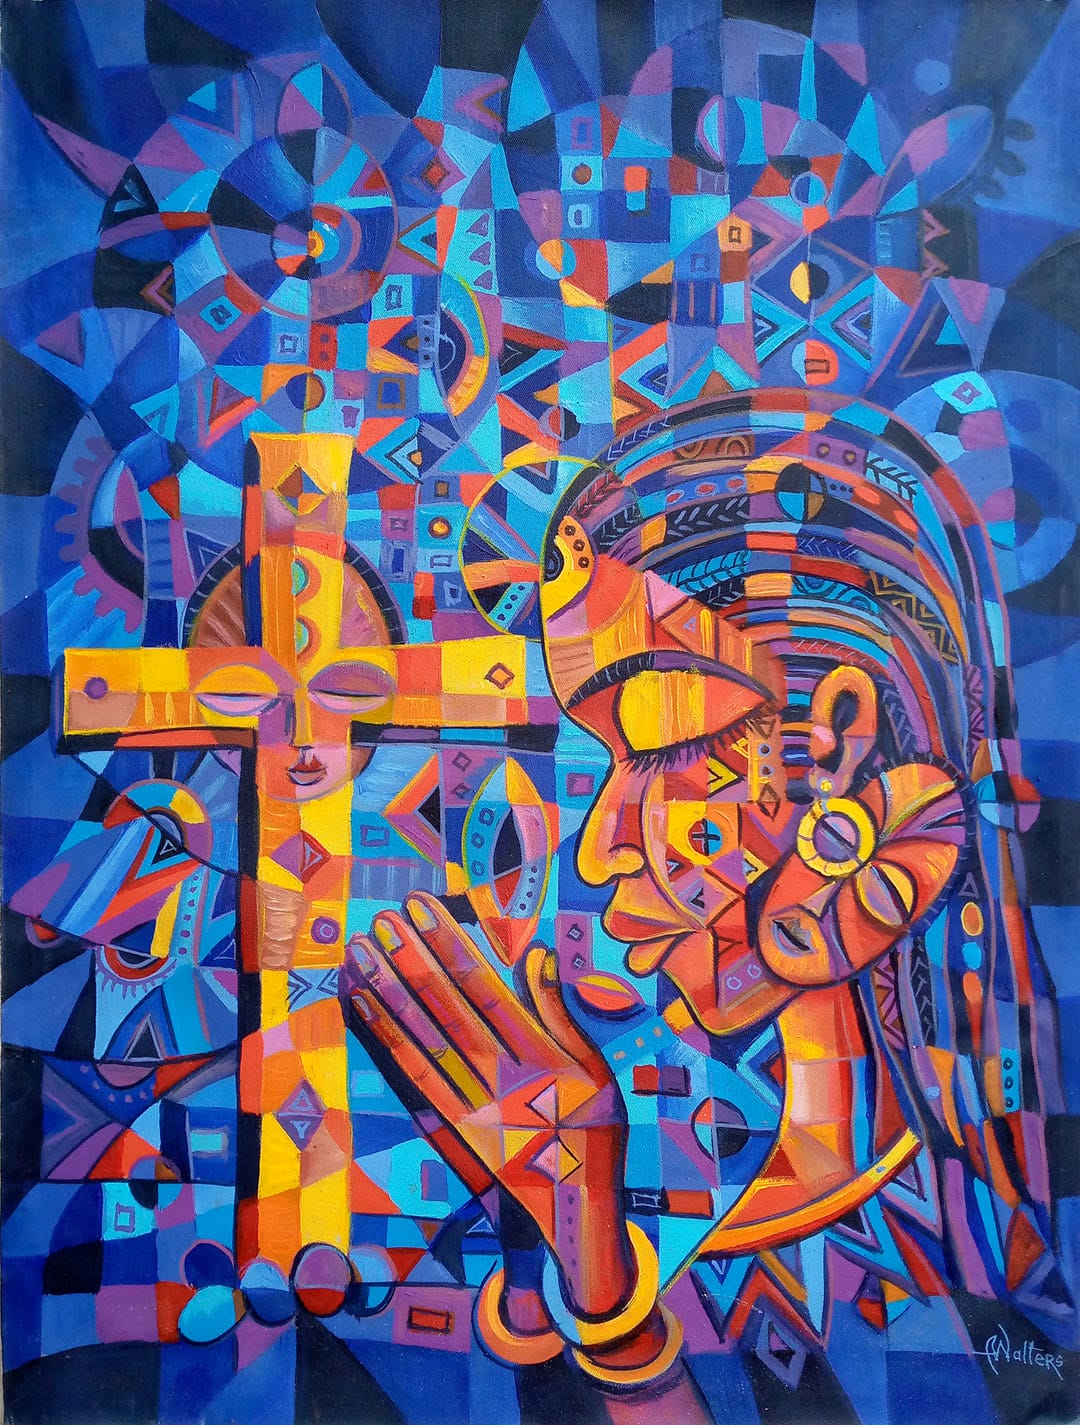 Here is a painting from Cameroon of African Christians at prayer.